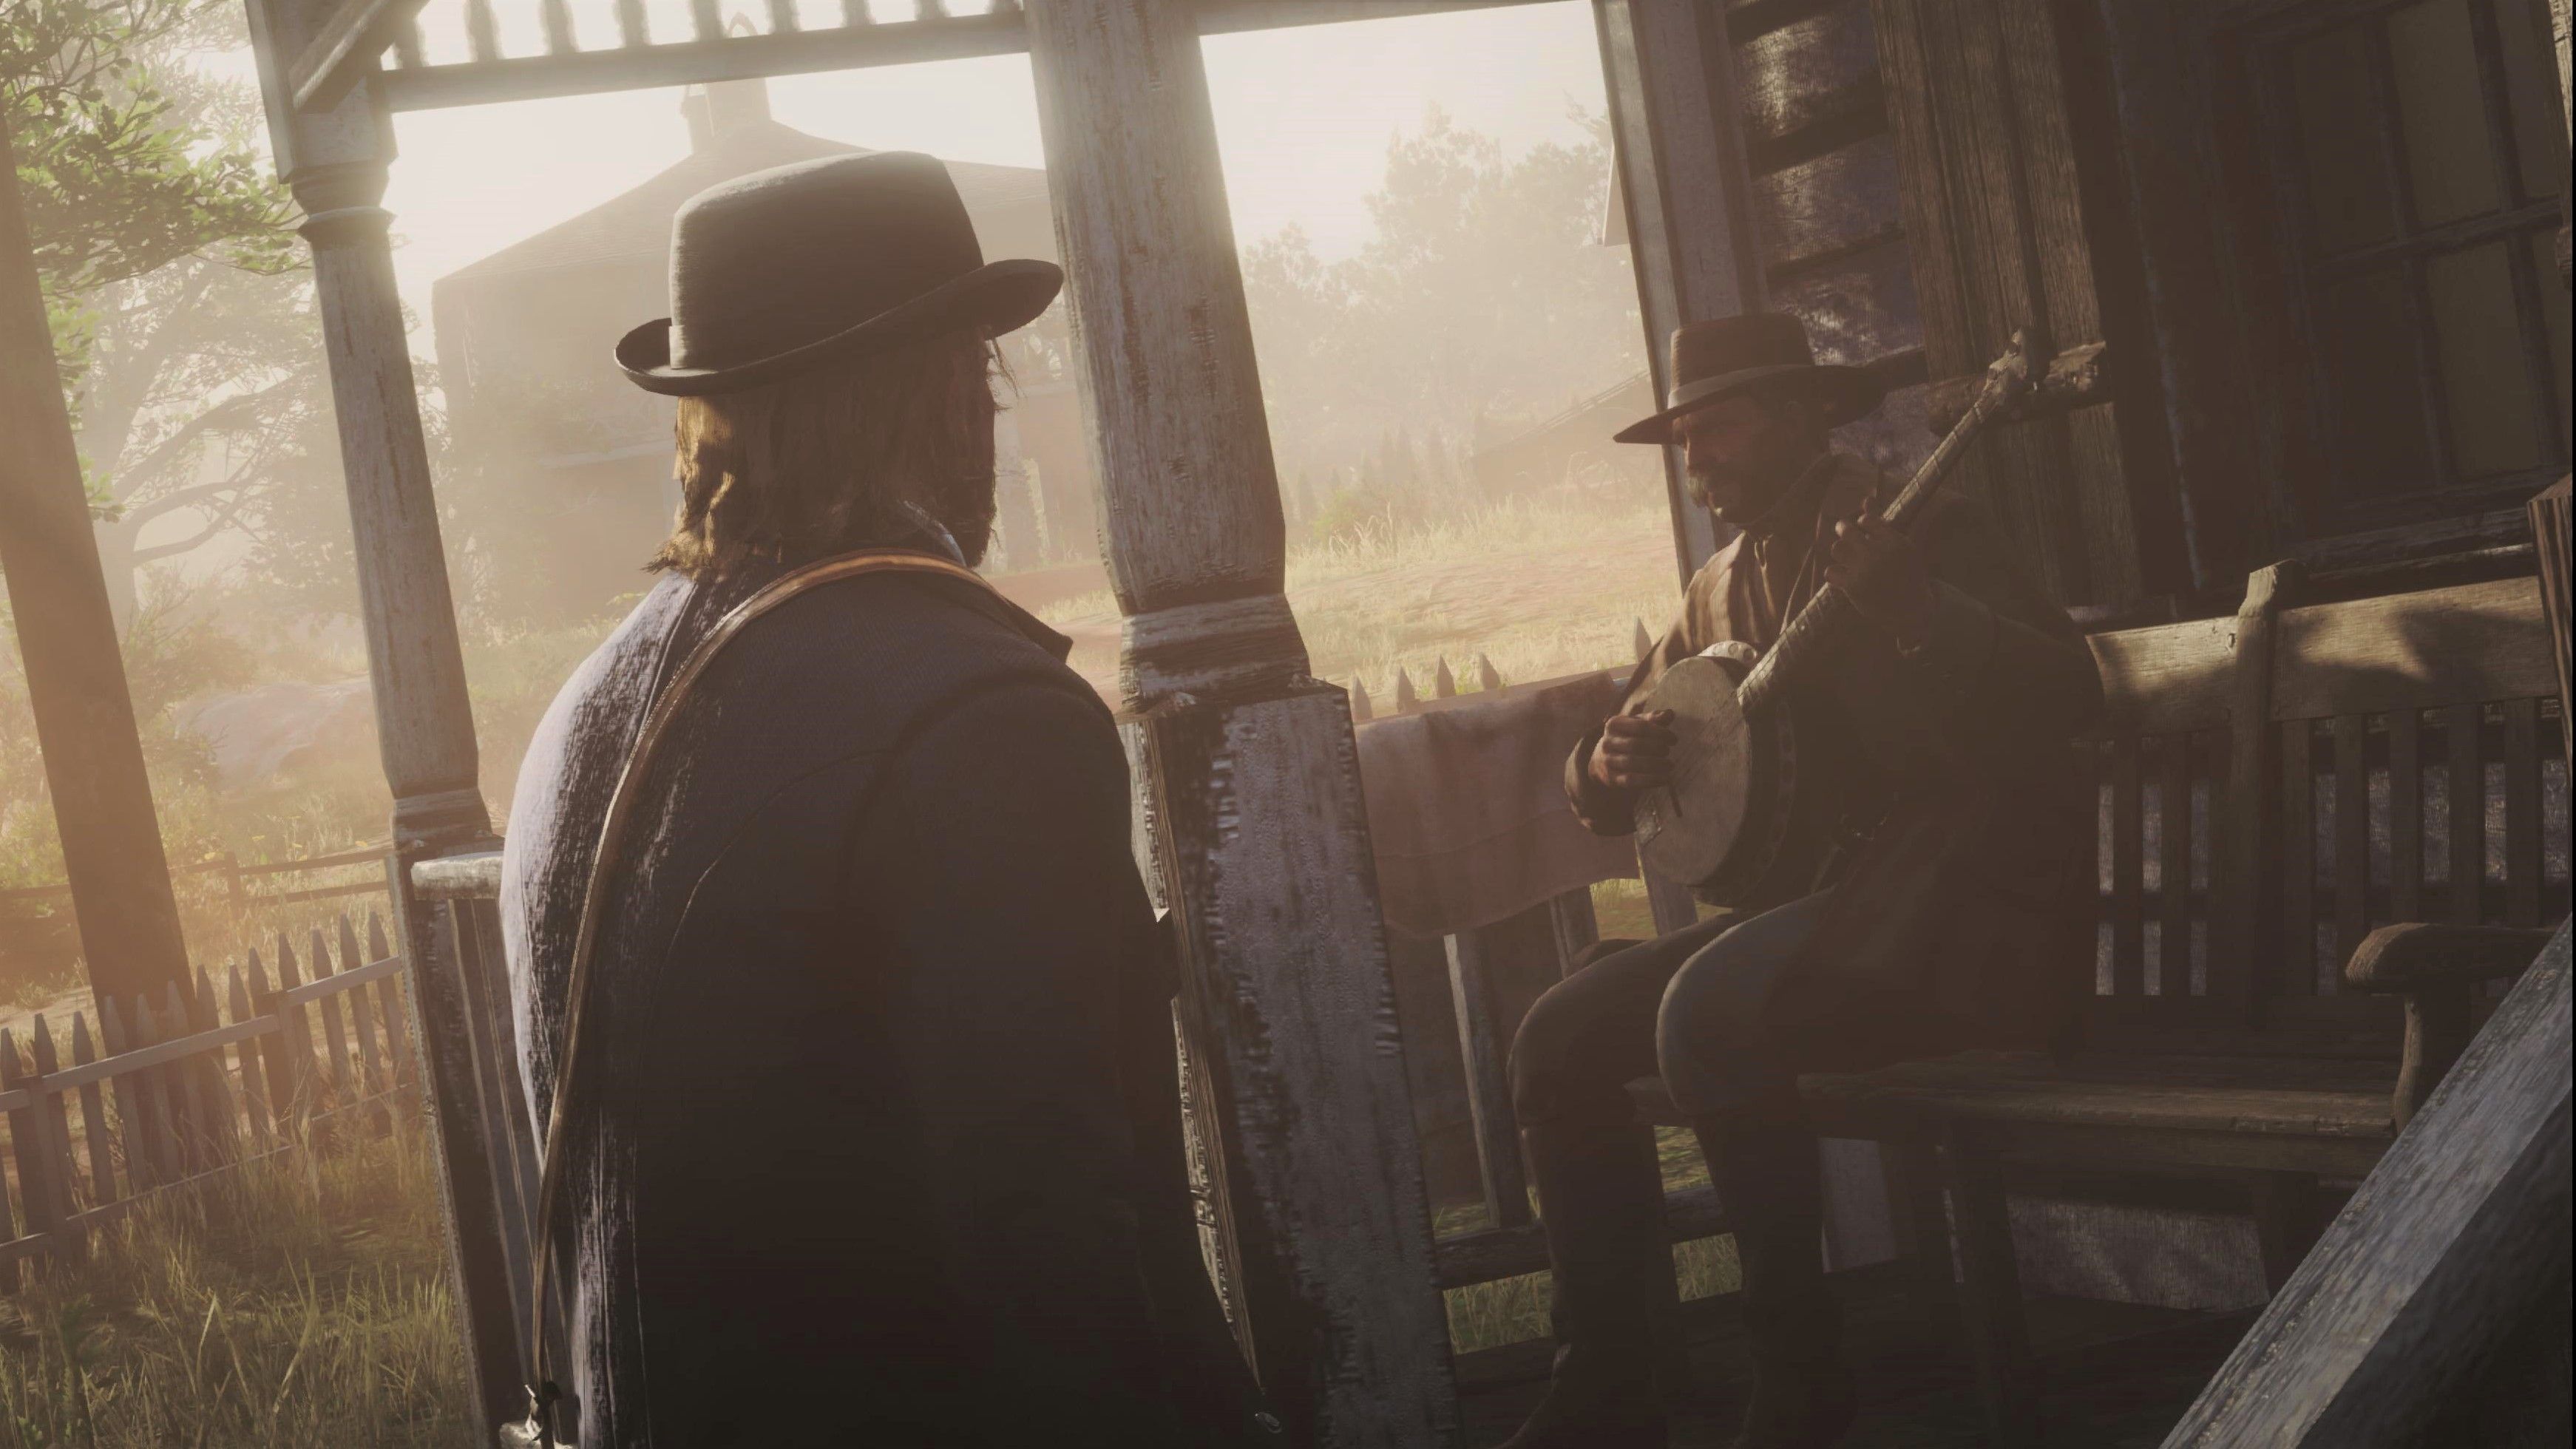 Red Dead Redemption 2’s Soundscape Made Me Sit At The Campfire And Just Listen